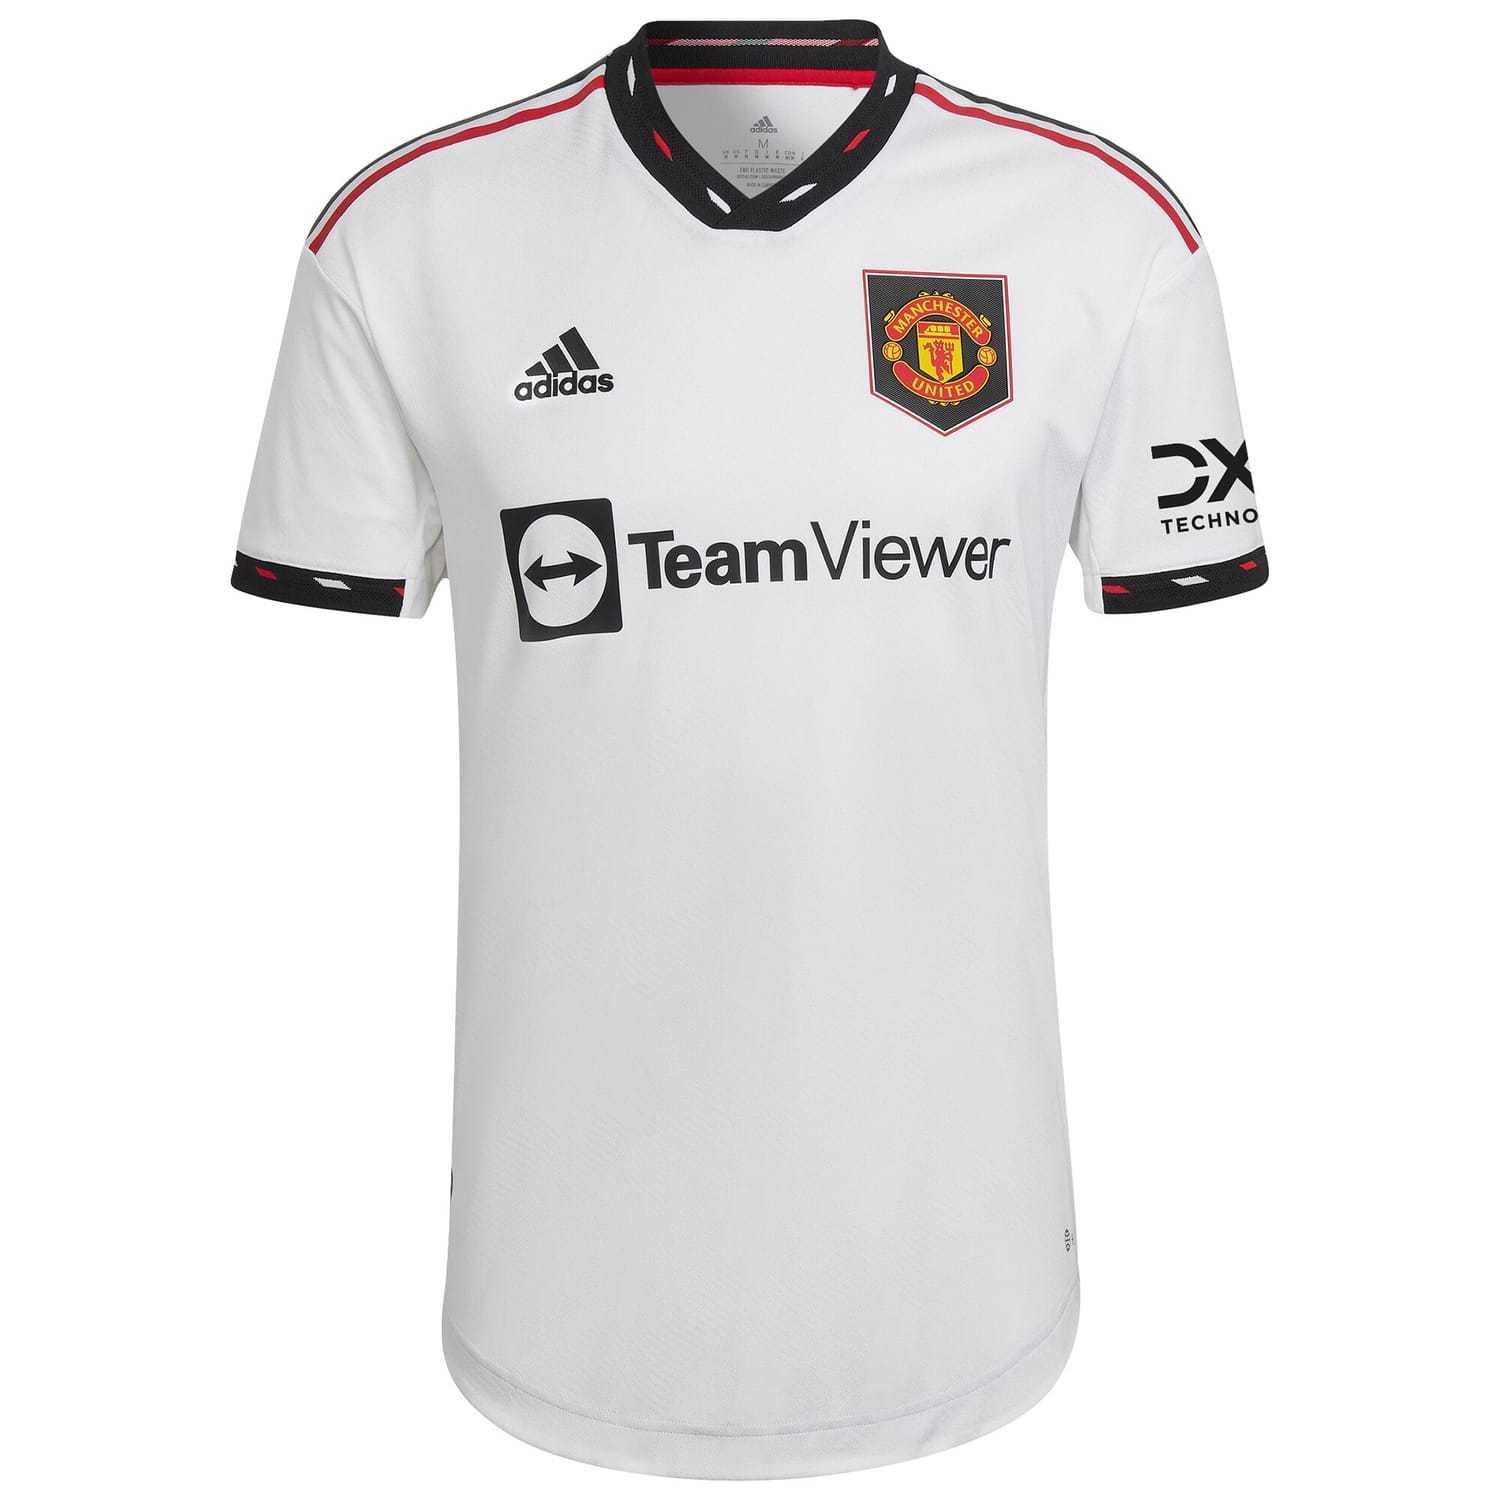 Premier League Manchester United Away Authentic Jersey Shirt 2022-23 player Wout Weghorst 27 printing for Men